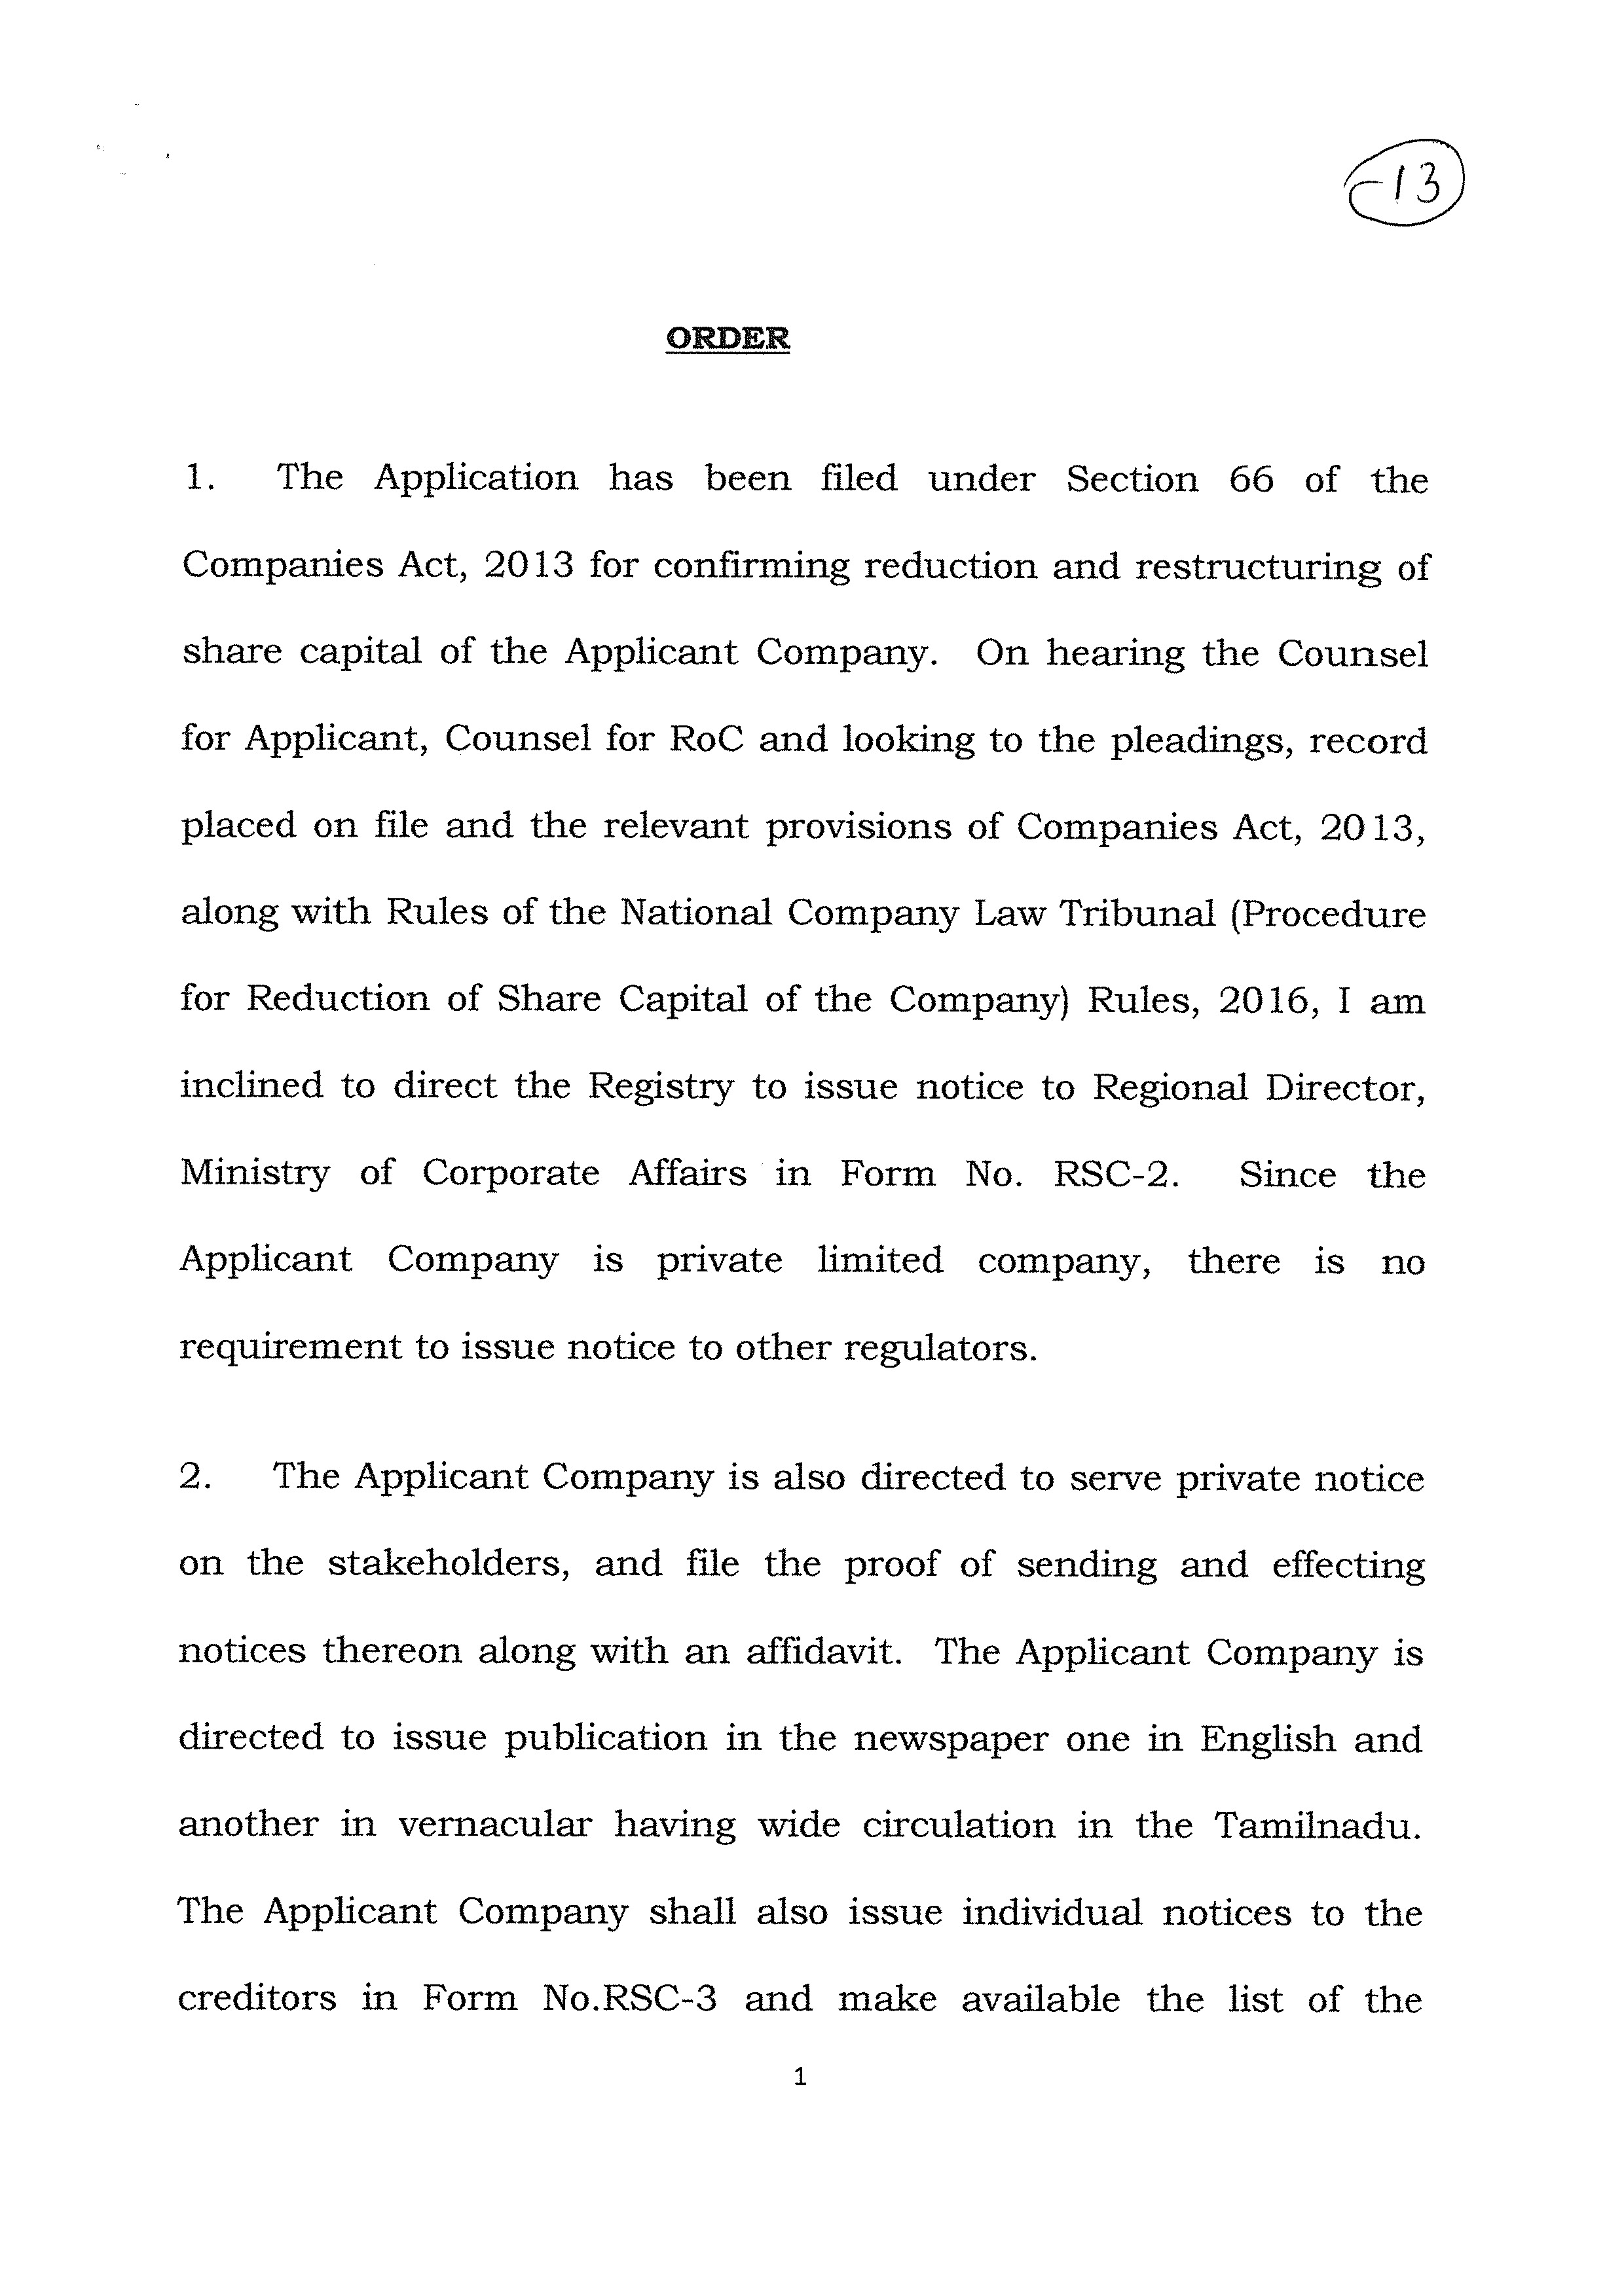 CP 1498 - NCLT Directions - 29012019 _Page_2